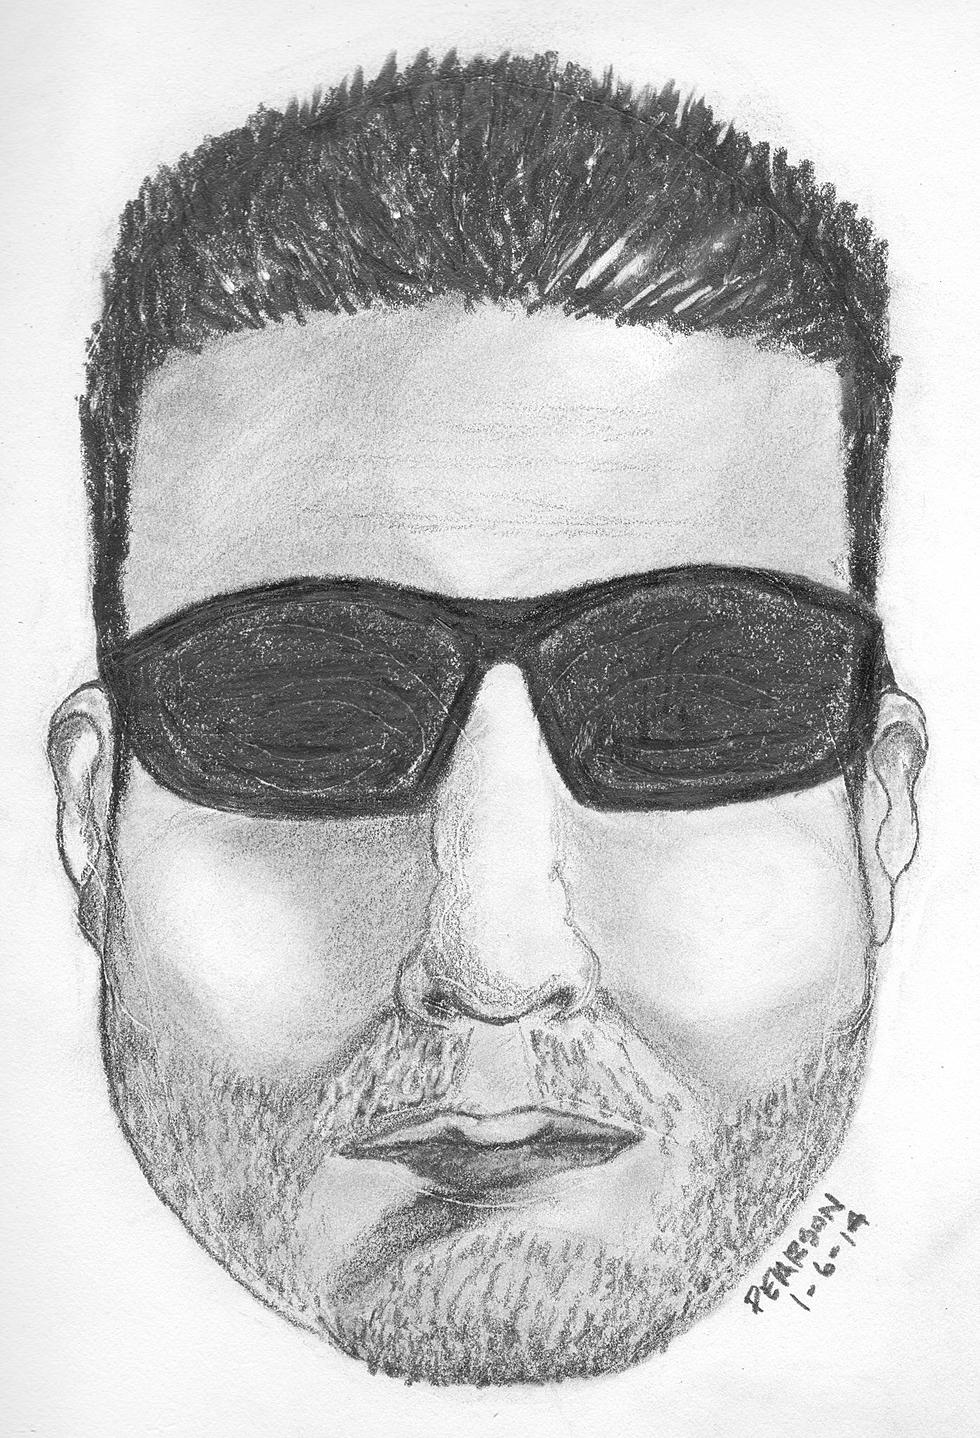 Lafayette Police Release Sketch Of Possible Suspect In Acadiana Mall Sexual Assault